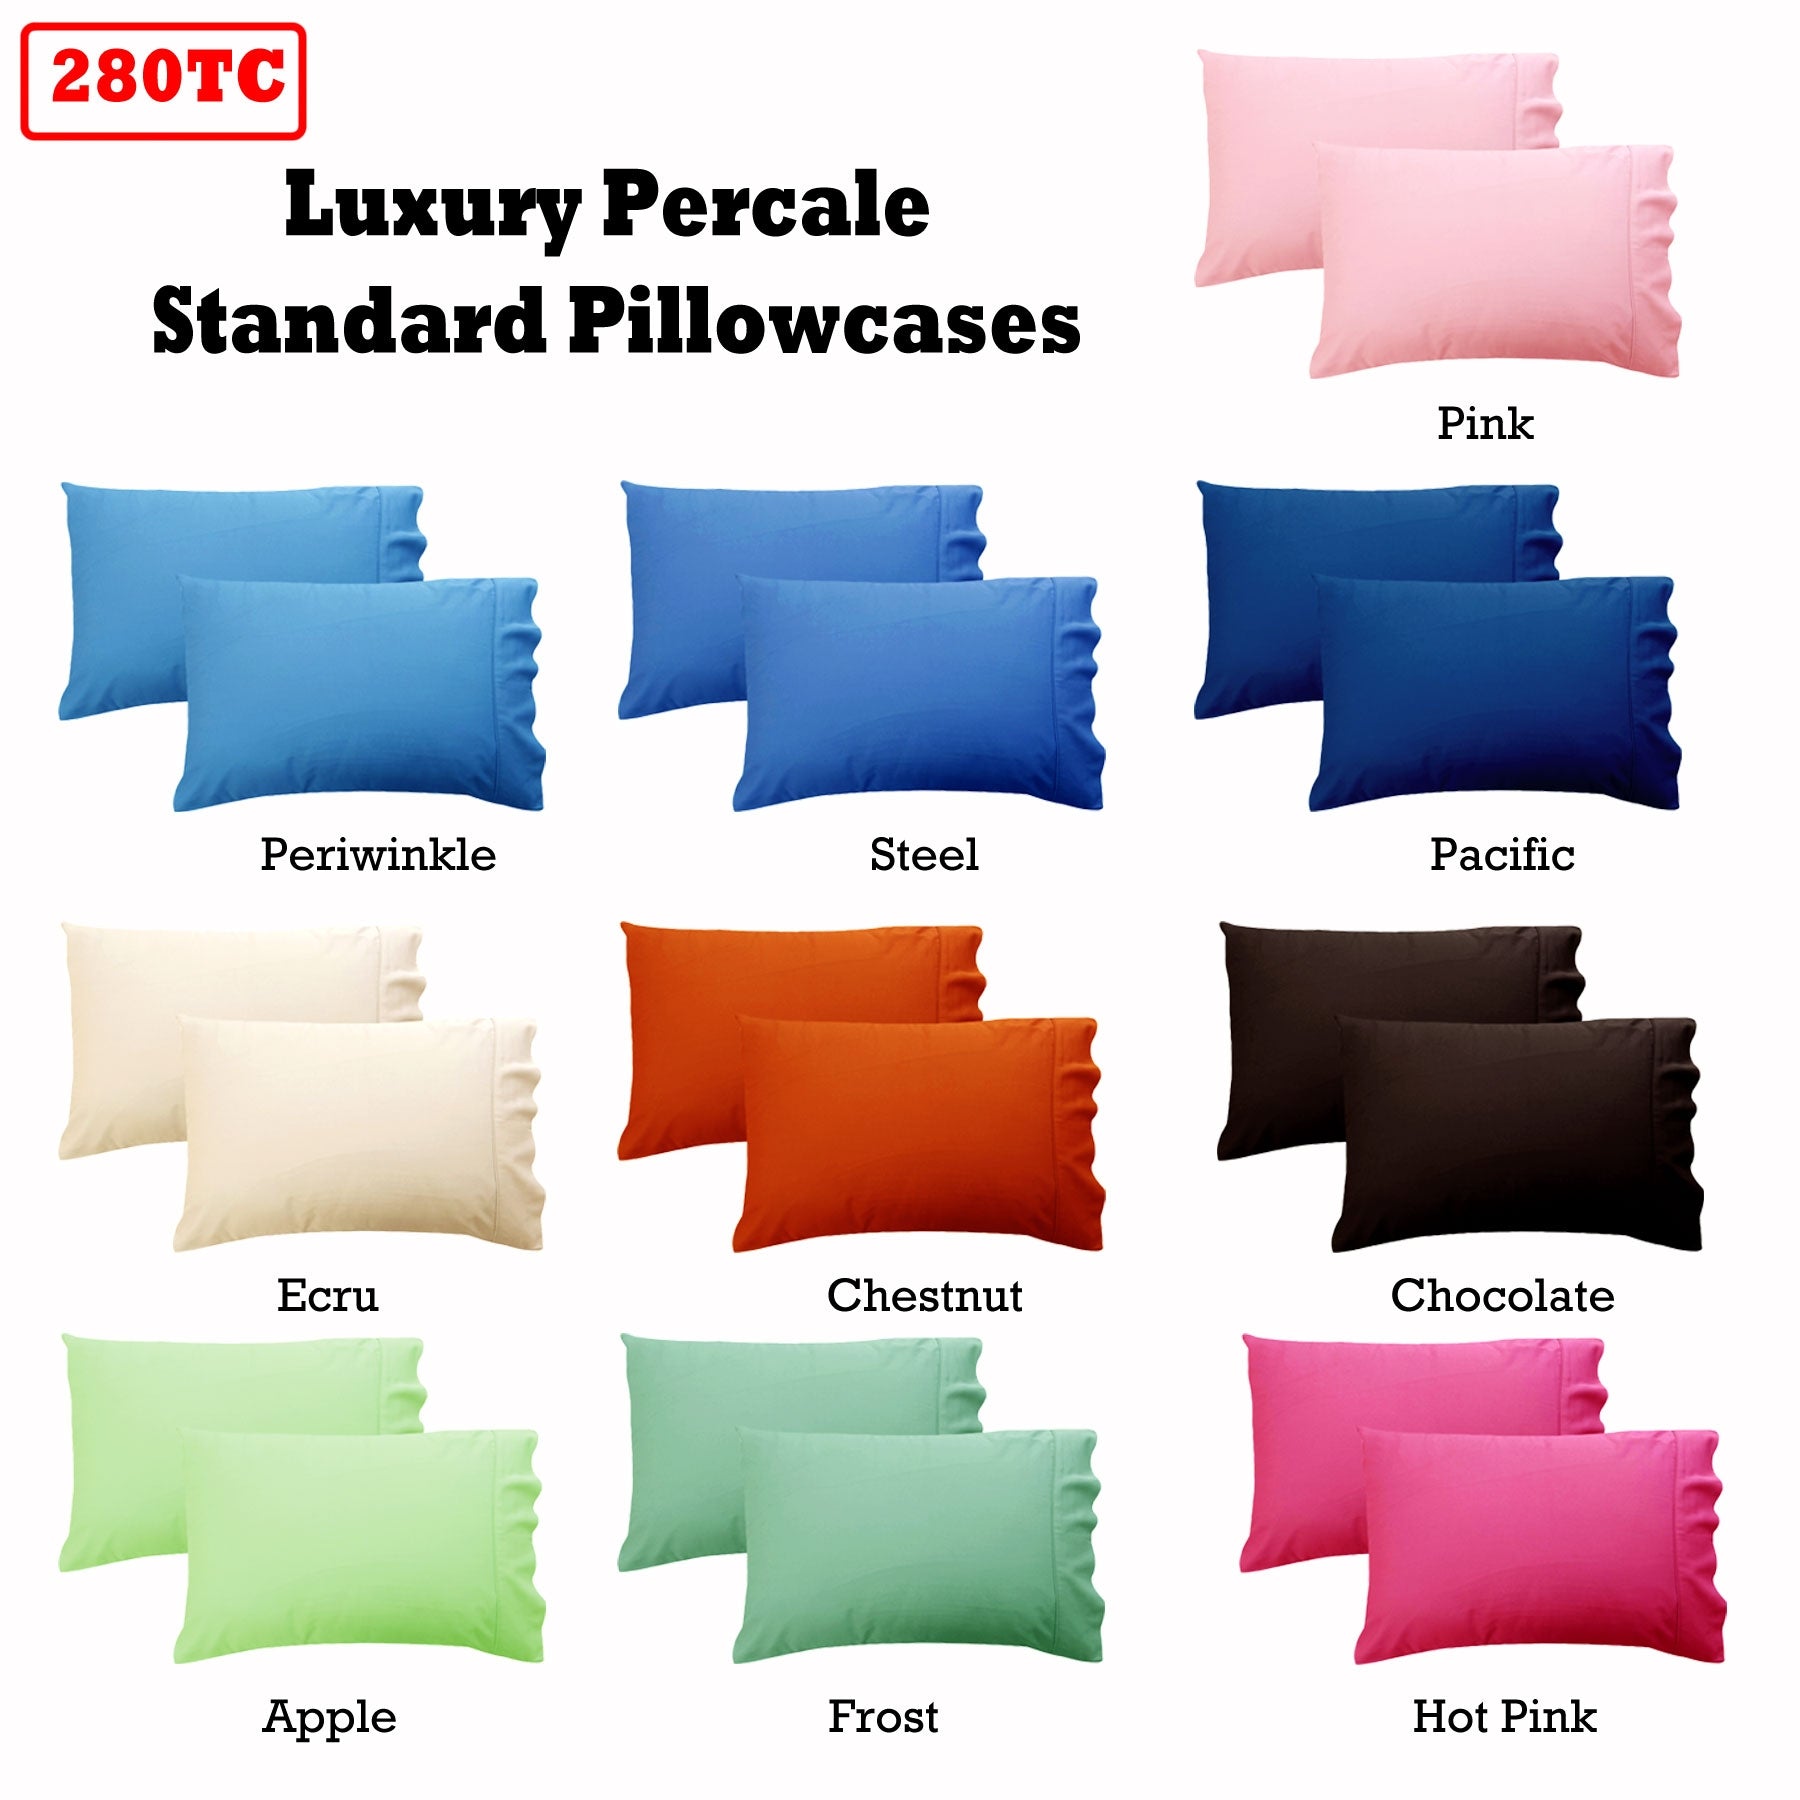 280TC Luxury Percale Standard Pillowcases Frost - 0